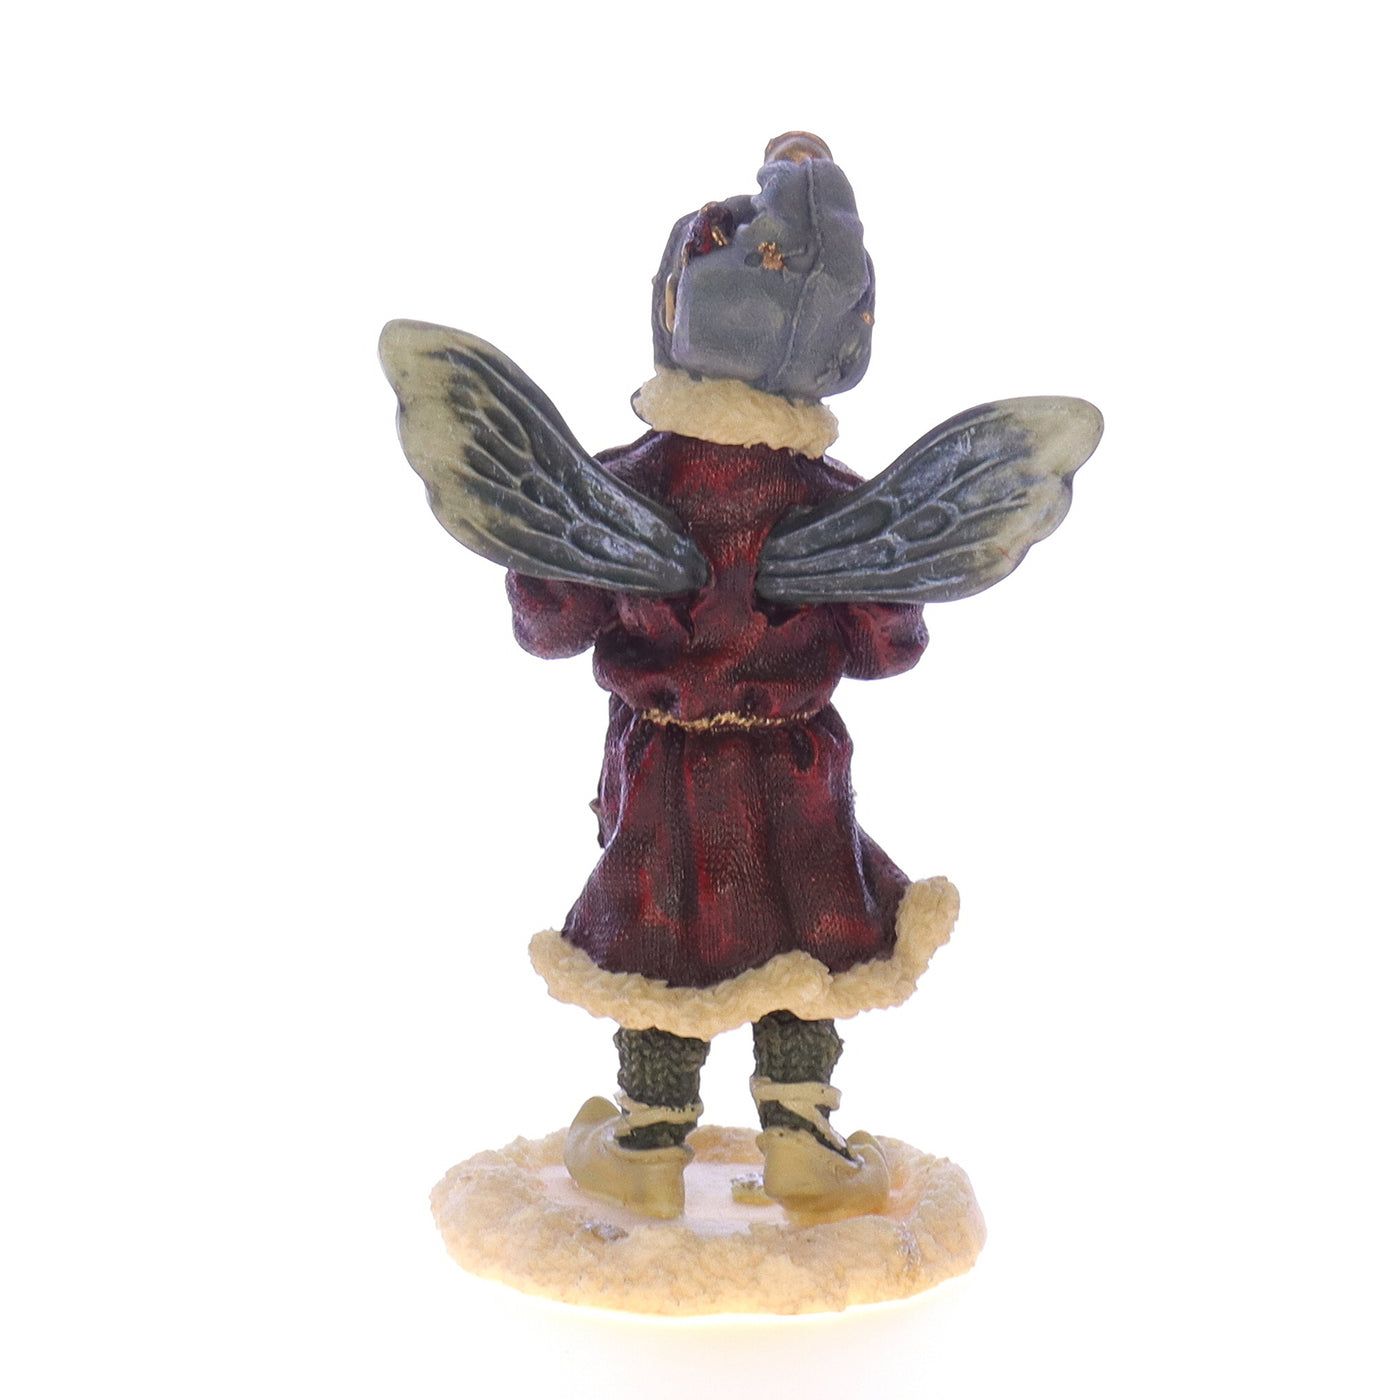 The_Wee_Folkstone_Collection_36002_Kristabell_Faeriefrost_Christmas_Figurine_1997 Back View